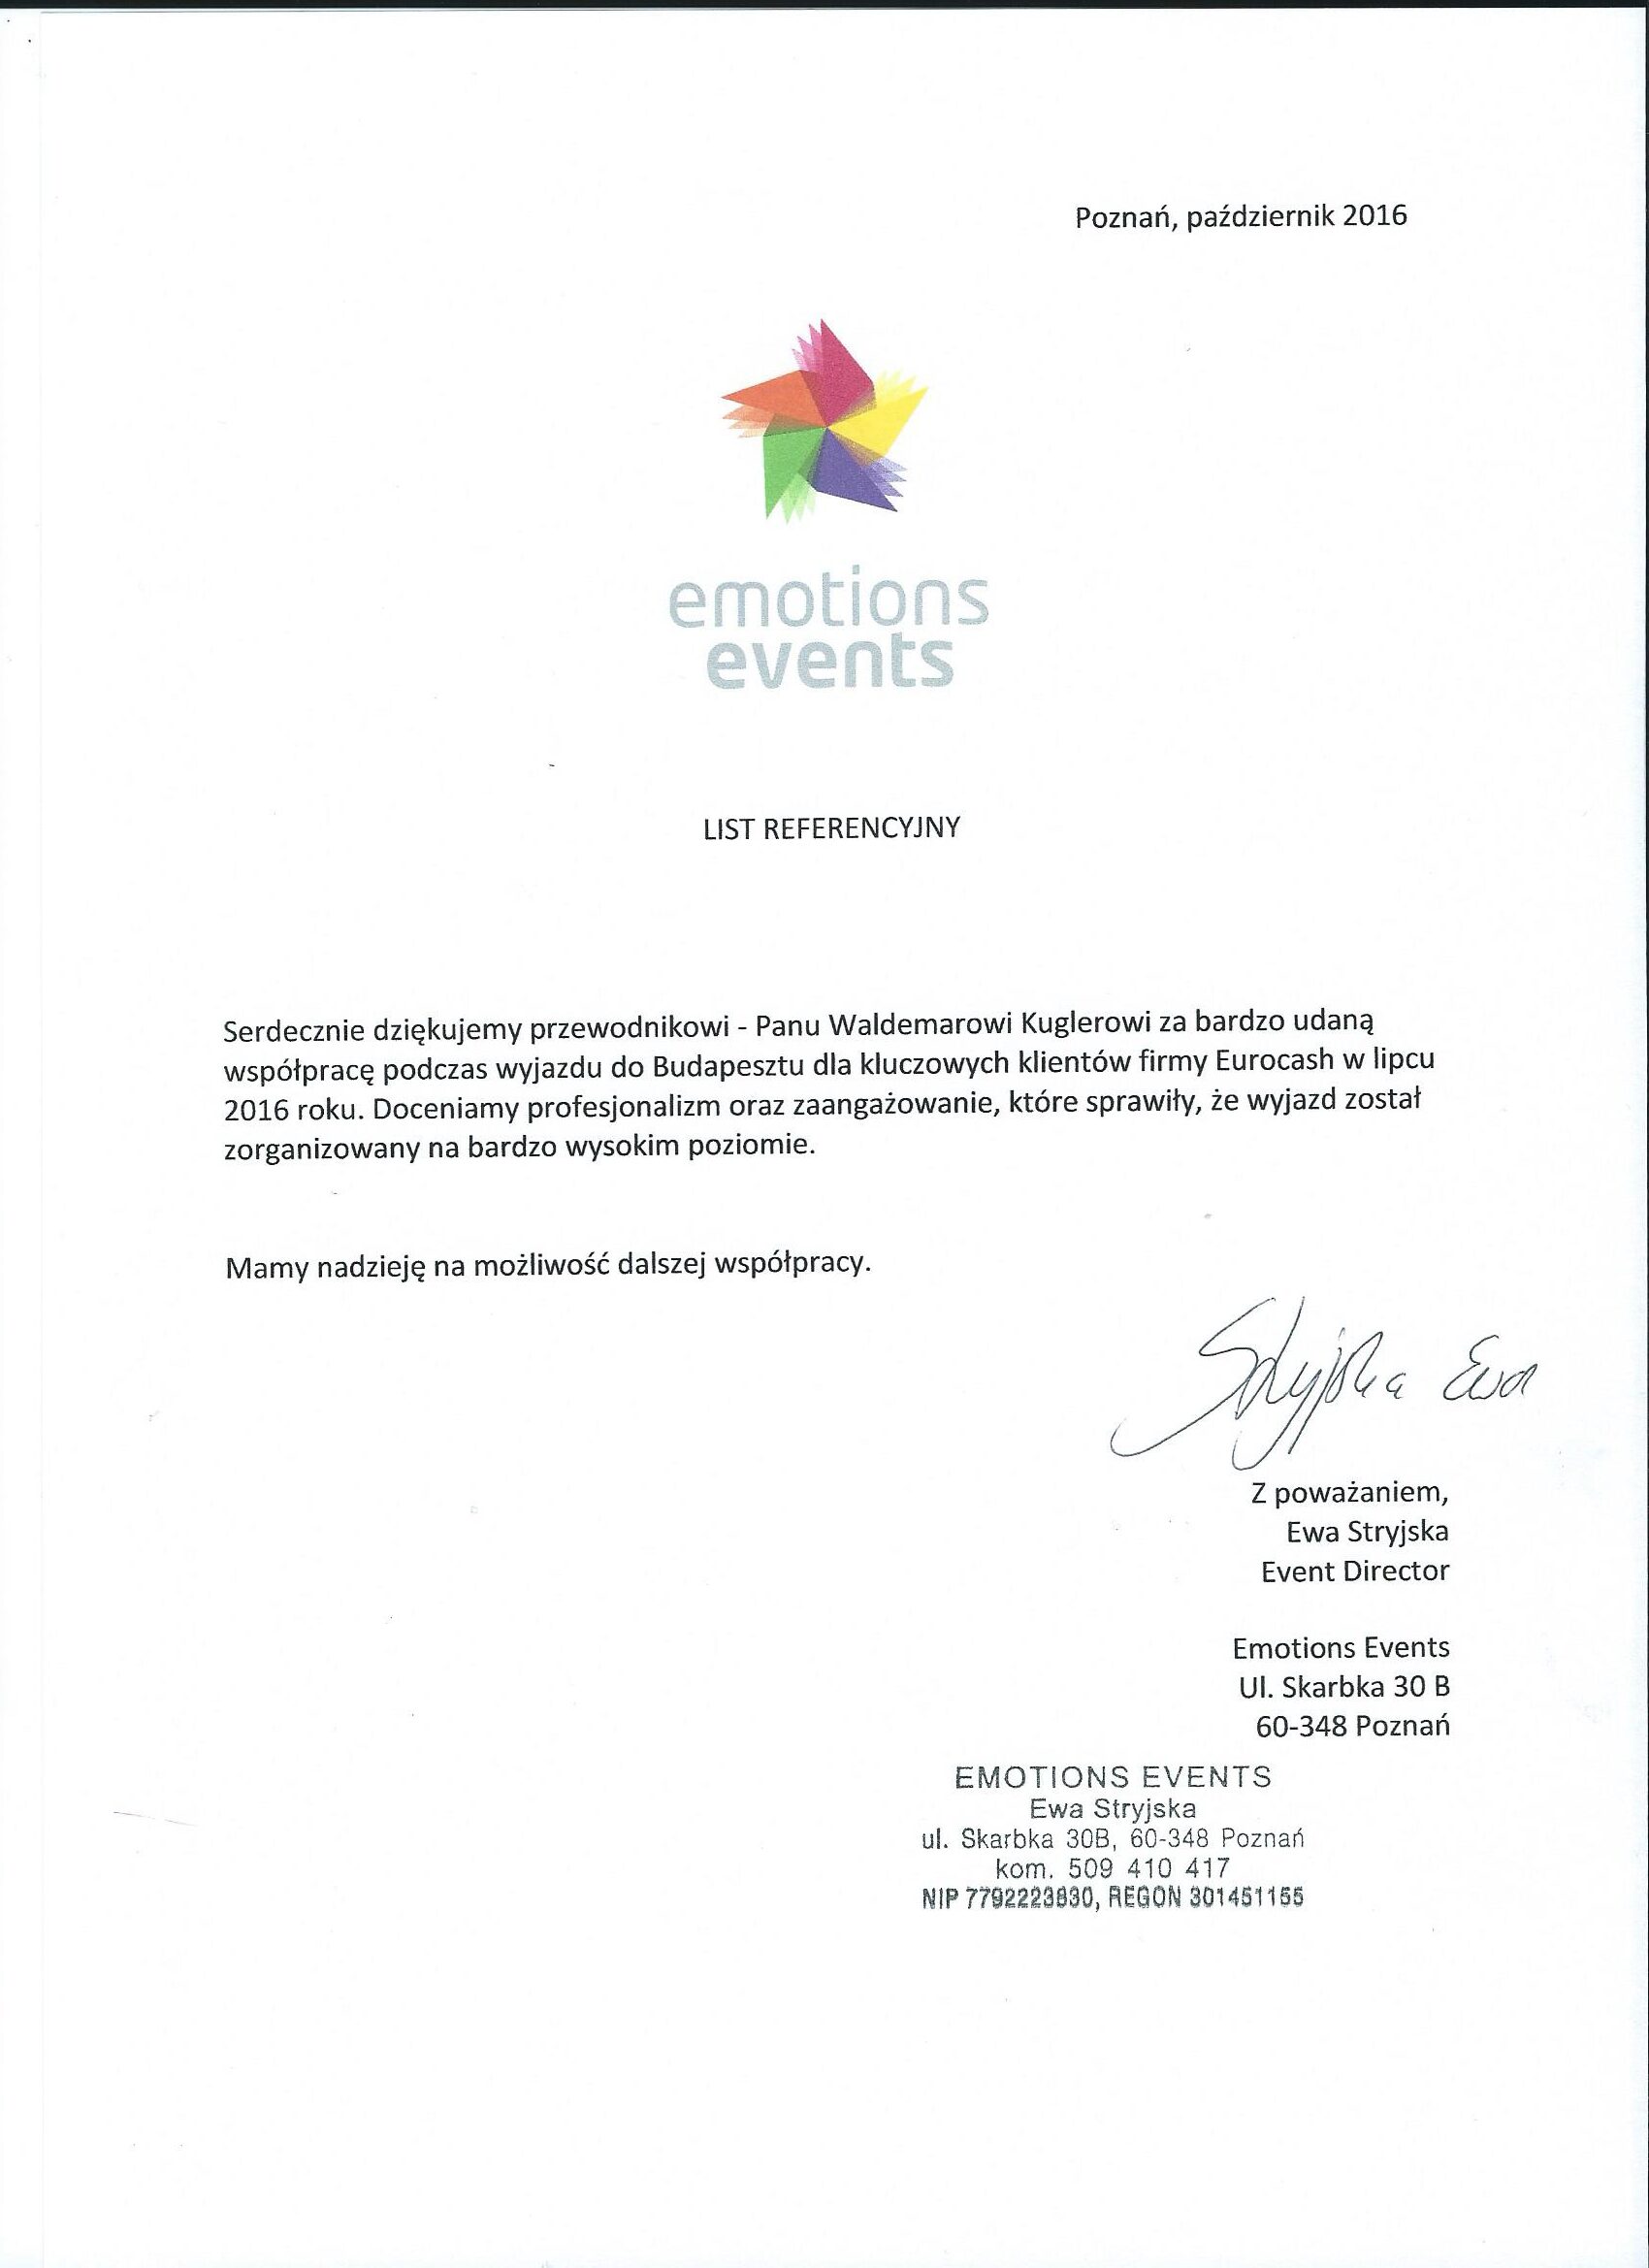 emotions_events